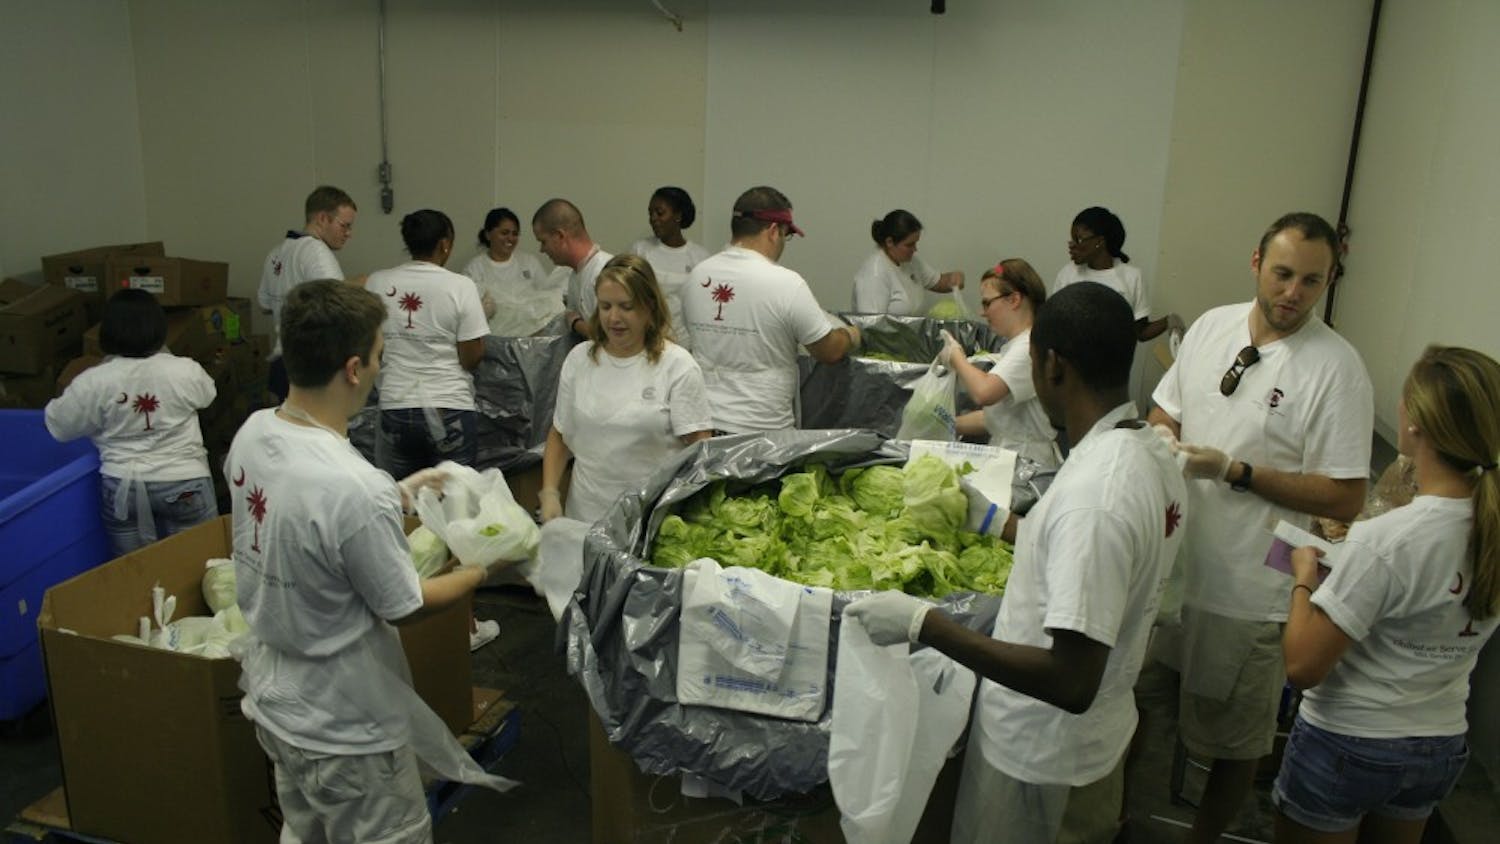 Students from USC School of Law help sort lettuce at Harvest Hope Food Bank during a service day